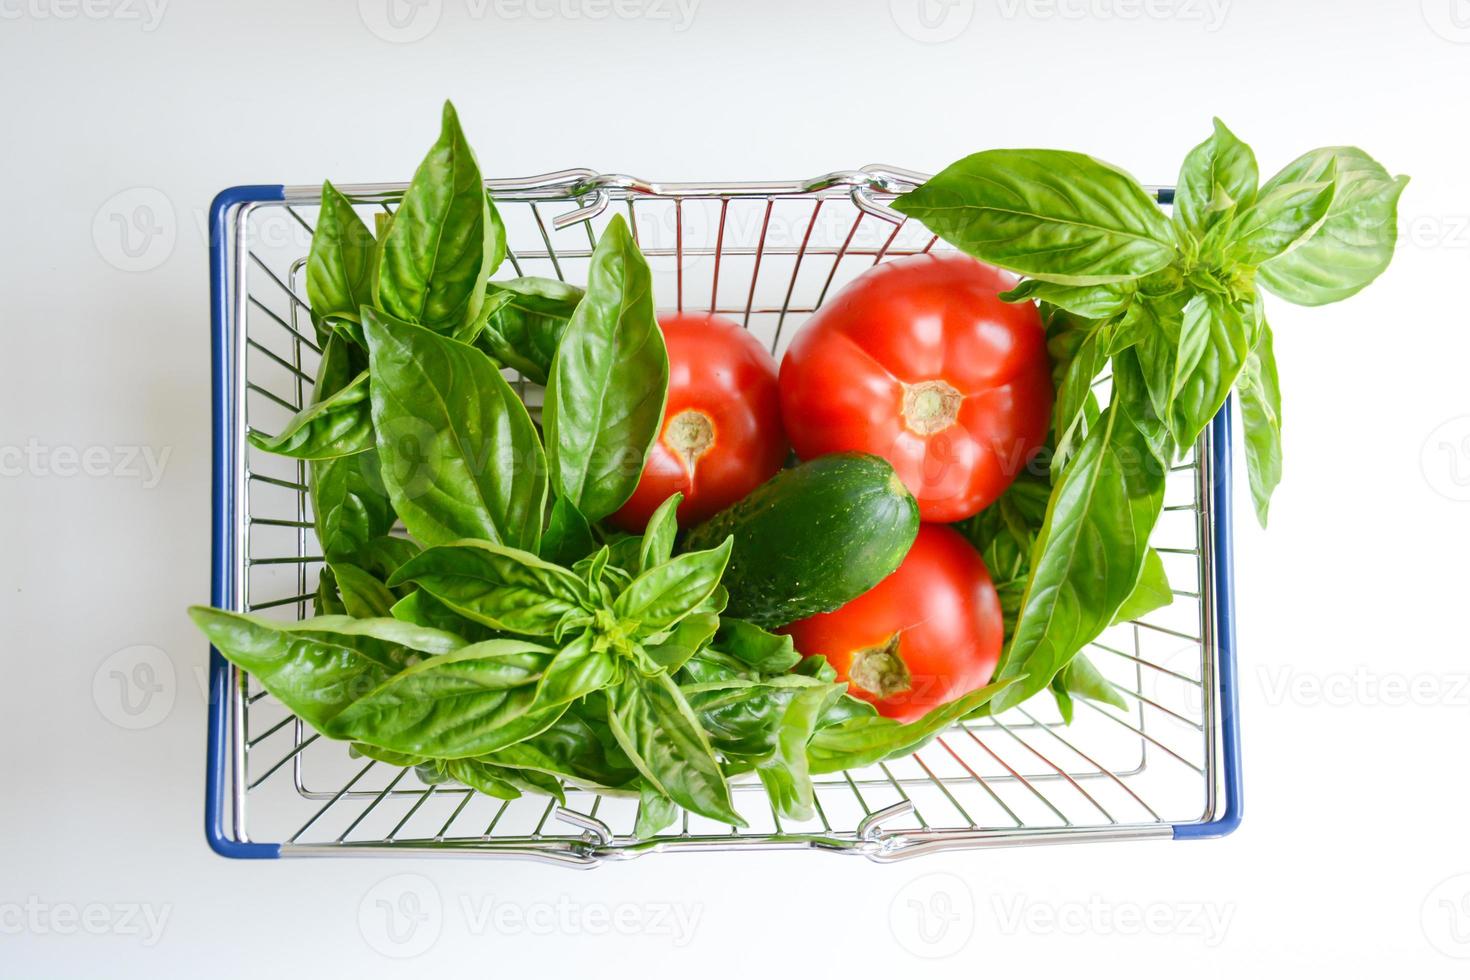 Fresh Vegetables in shopping cart isolated on white background photo